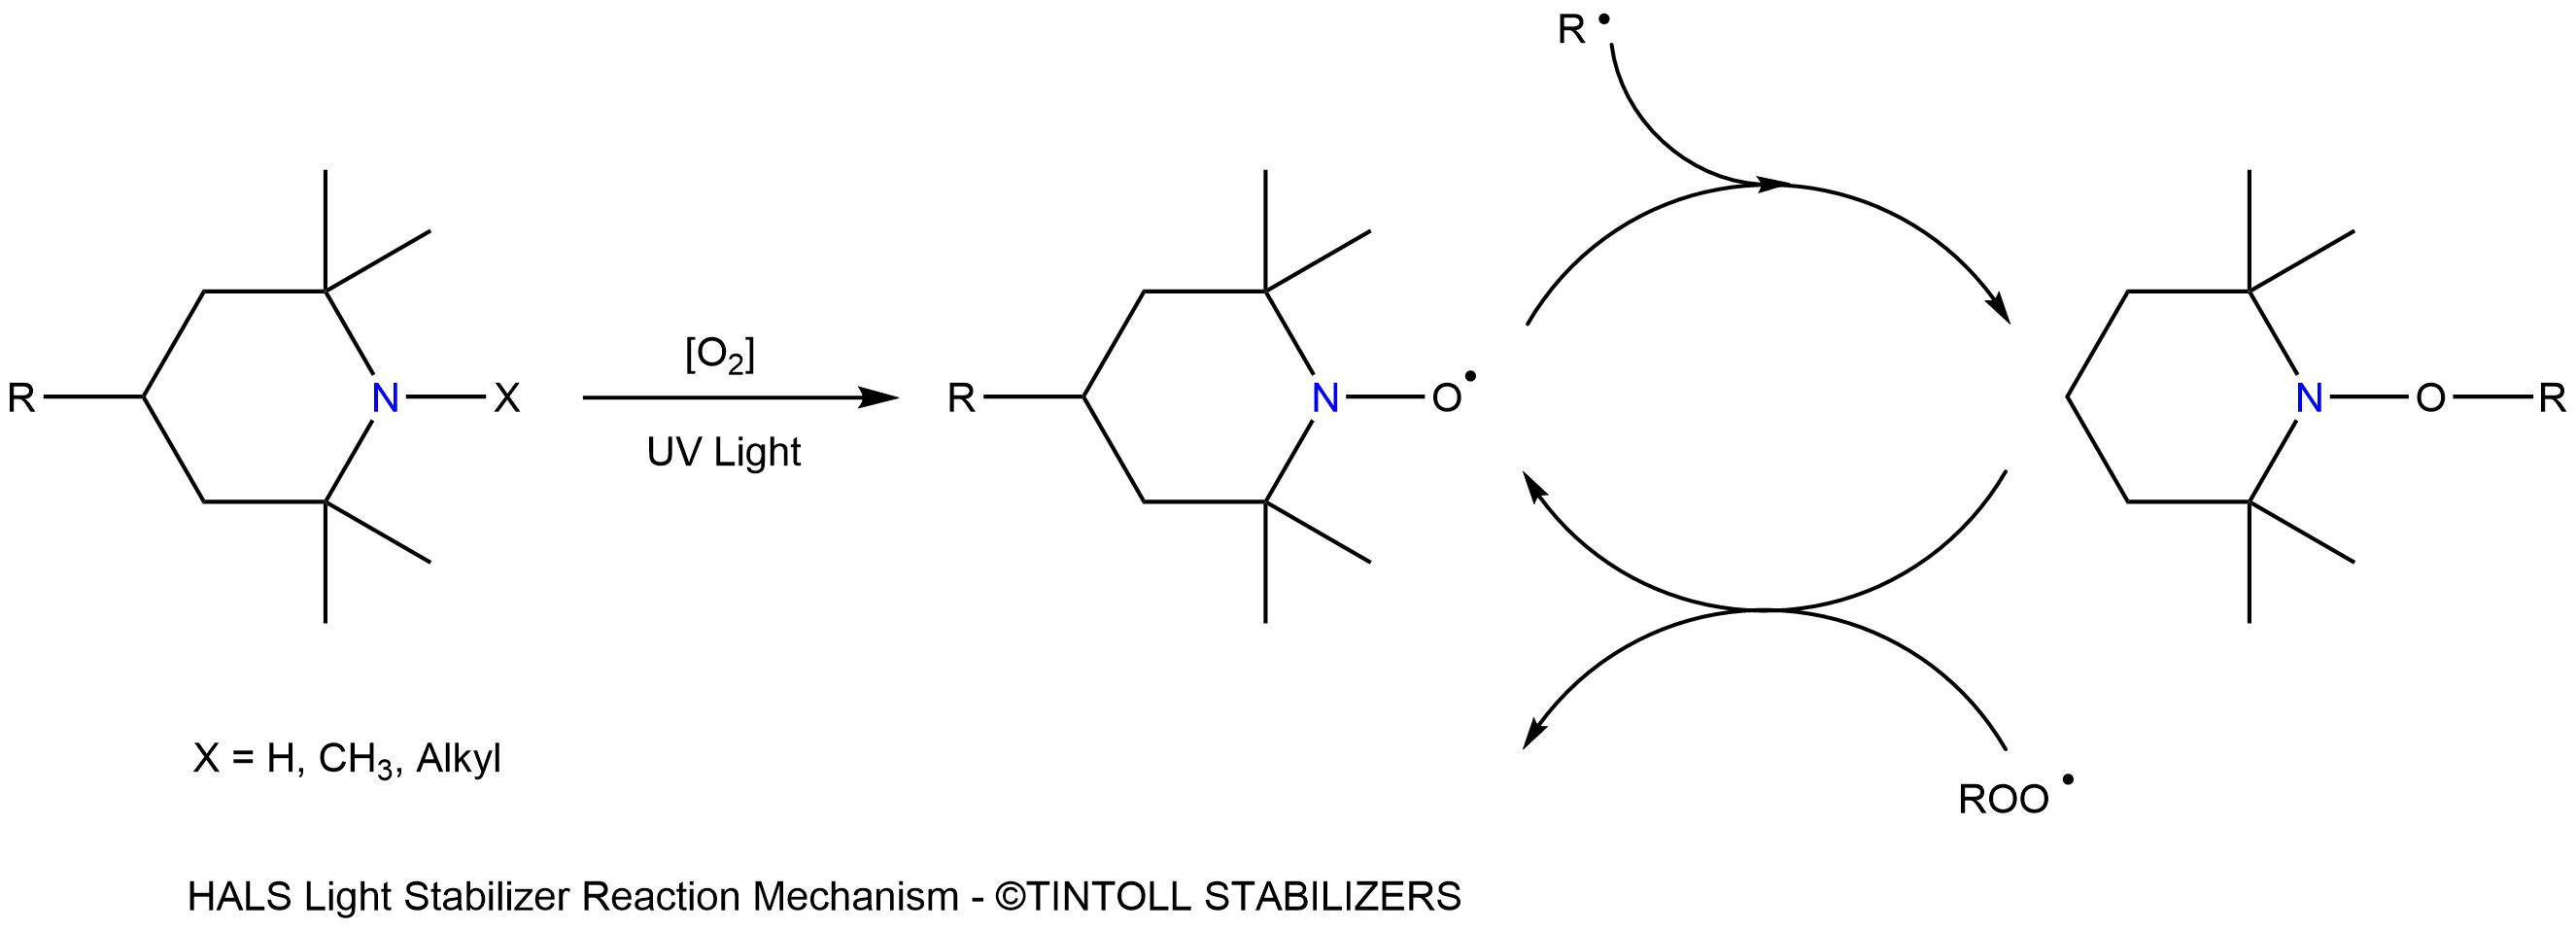 Mechanism of Action of Hindered Amine Light Stabilizer